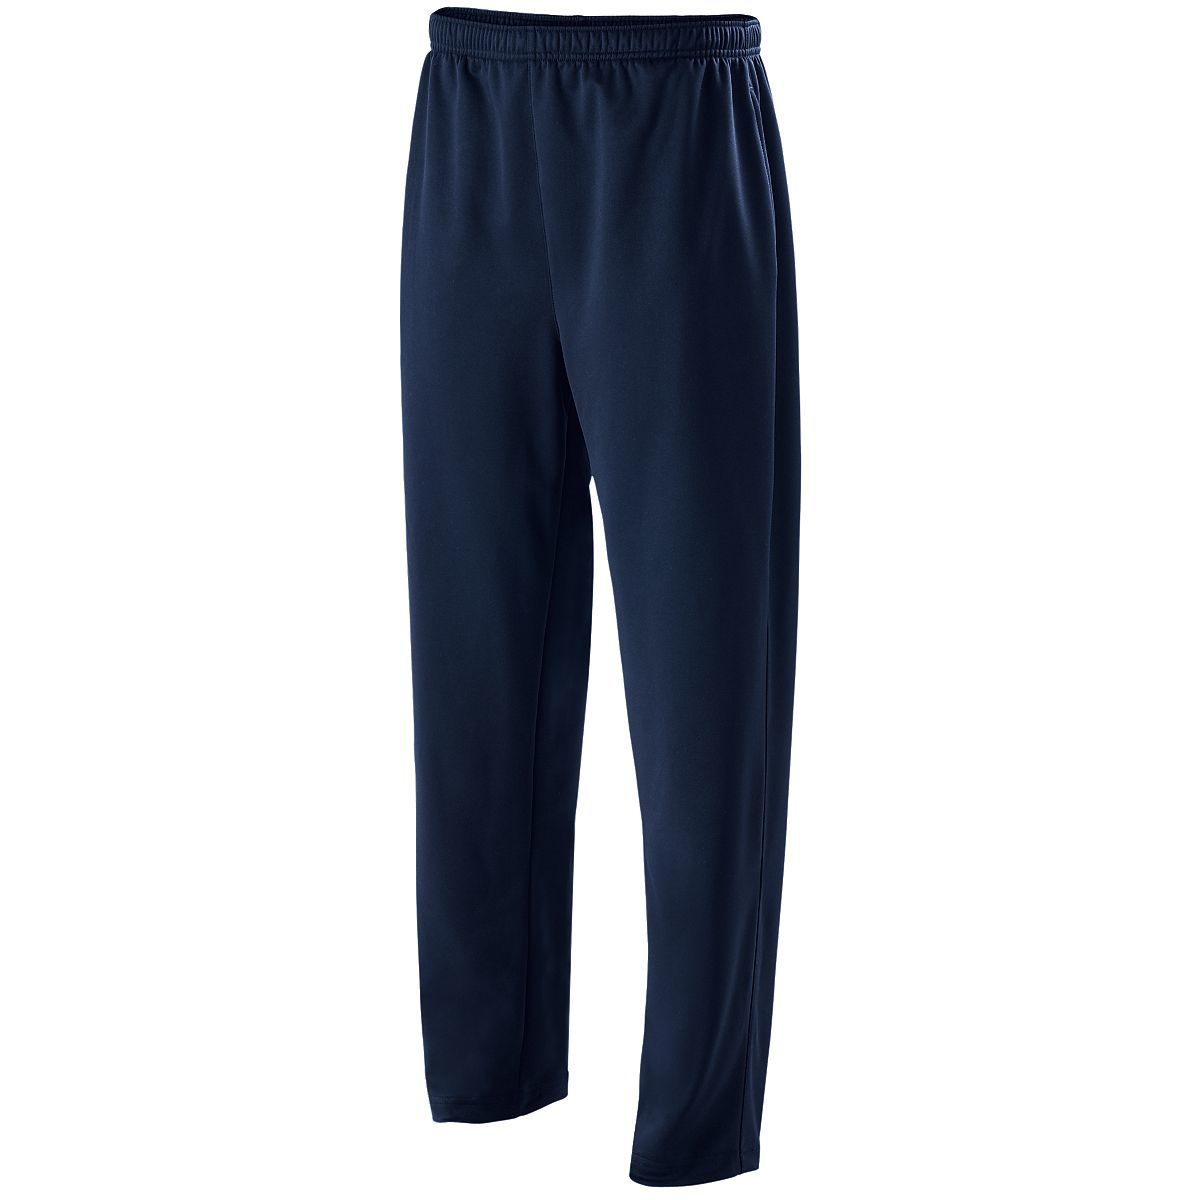 HOLLOWAY 229171 Mens Moisture Wicking Performance Fleece Pant With Pockets